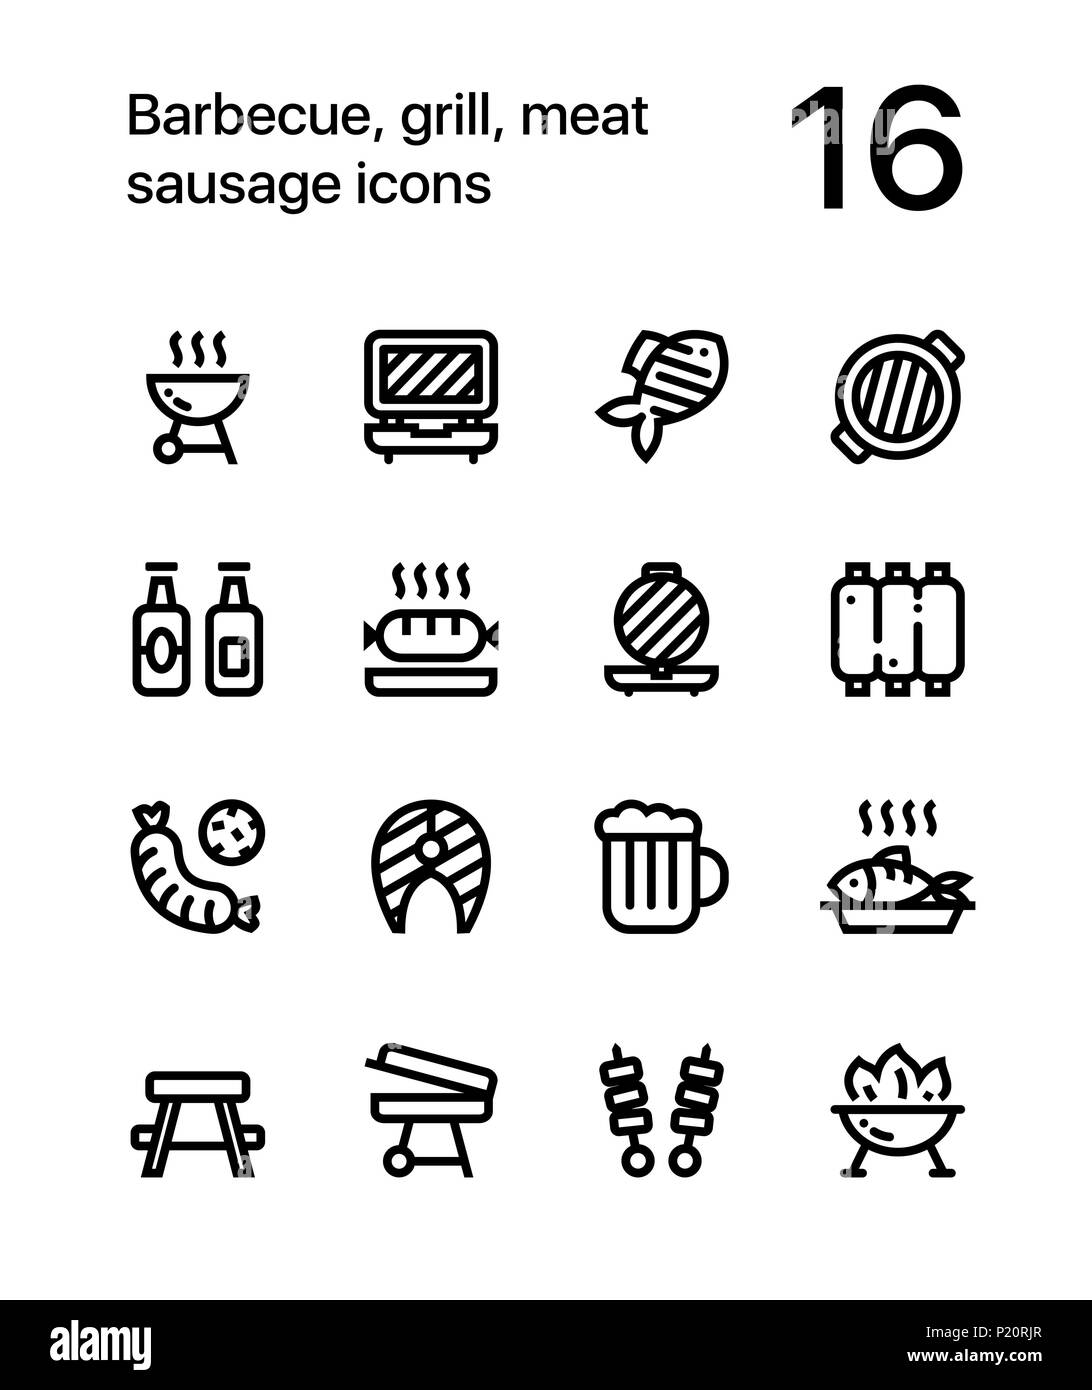 Barbecue, grill, meat, sausage icons for web and mobile design pack 2 Stock Vector